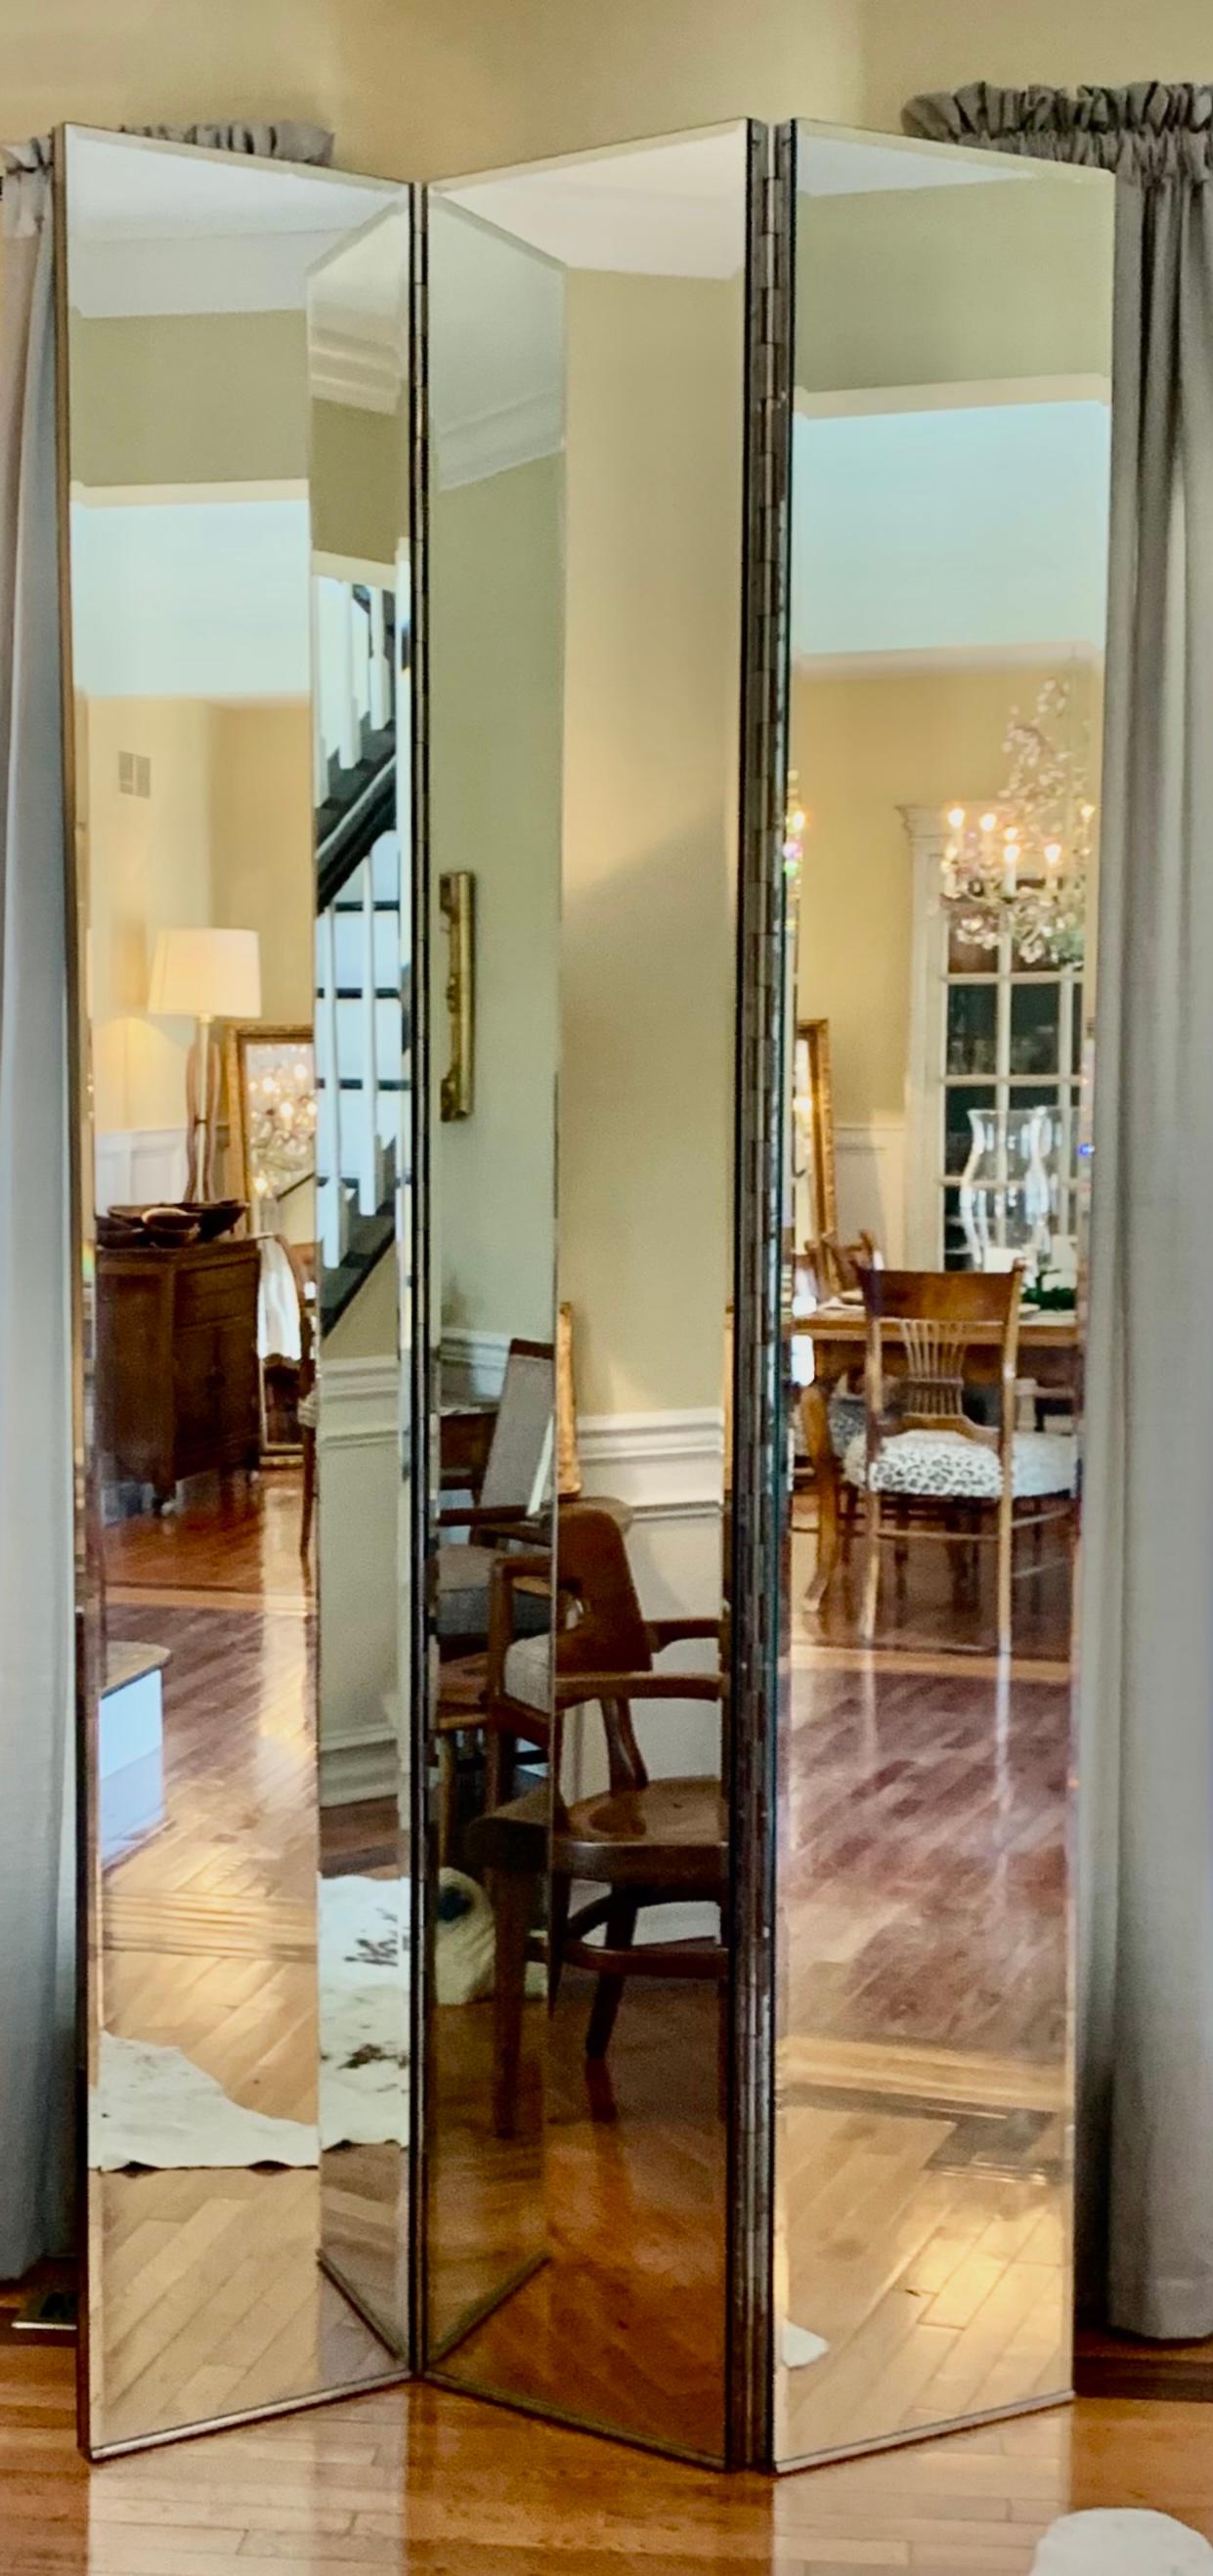 Rare and stunning vintage double-sided, three-panel mirrored room divider with full piano hinge. This piece is identical on both sides. Exquisite piano hinge runs top to bottom between the panels. The sides are also mirrored (1.25